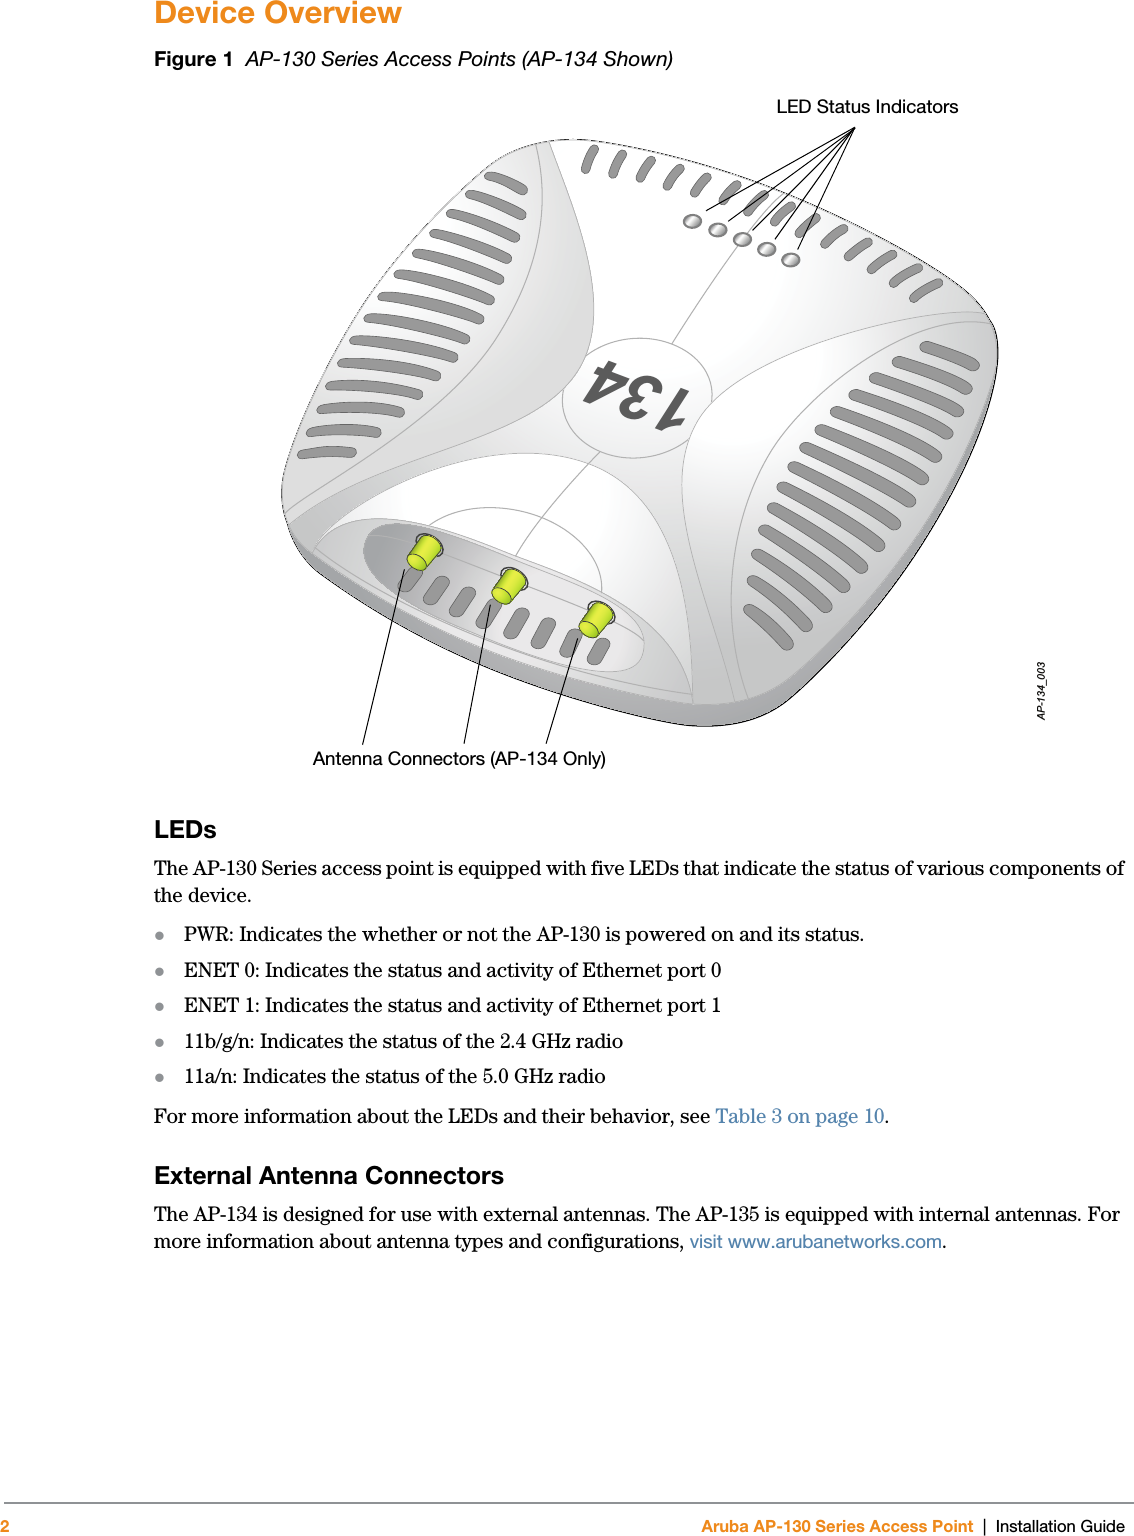 2Aruba AP-130 Series Access Point | Installation GuideDevice OverviewFigure 1  AP-130 Series Access Points (AP-134 Shown) LEDsThe AP-130 Series access point is equipped with five LEDs that indicate the status of various components of the device.PWR: Indicates the whether or not the AP-130 is powered on and its status.ENET 0: Indicates the status and activity of Ethernet port 0ENET 1: Indicates the status and activity of Ethernet port 111b/g/n: Indicates the status of the 2.4 GHz radio11a/n: Indicates the status of the 5.0 GHz radioFor more information about the LEDs and their behavior, see Table 3 on page 10.External Antenna ConnectorsThe AP-134 is designed for use with external antennas. The AP-135 is equipped with internal antennas. For more information about antenna types and configurations, visit www.arubanetworks.com.AP-134_003134Antenna Connectors (AP-134 Only)LED Status Indicators